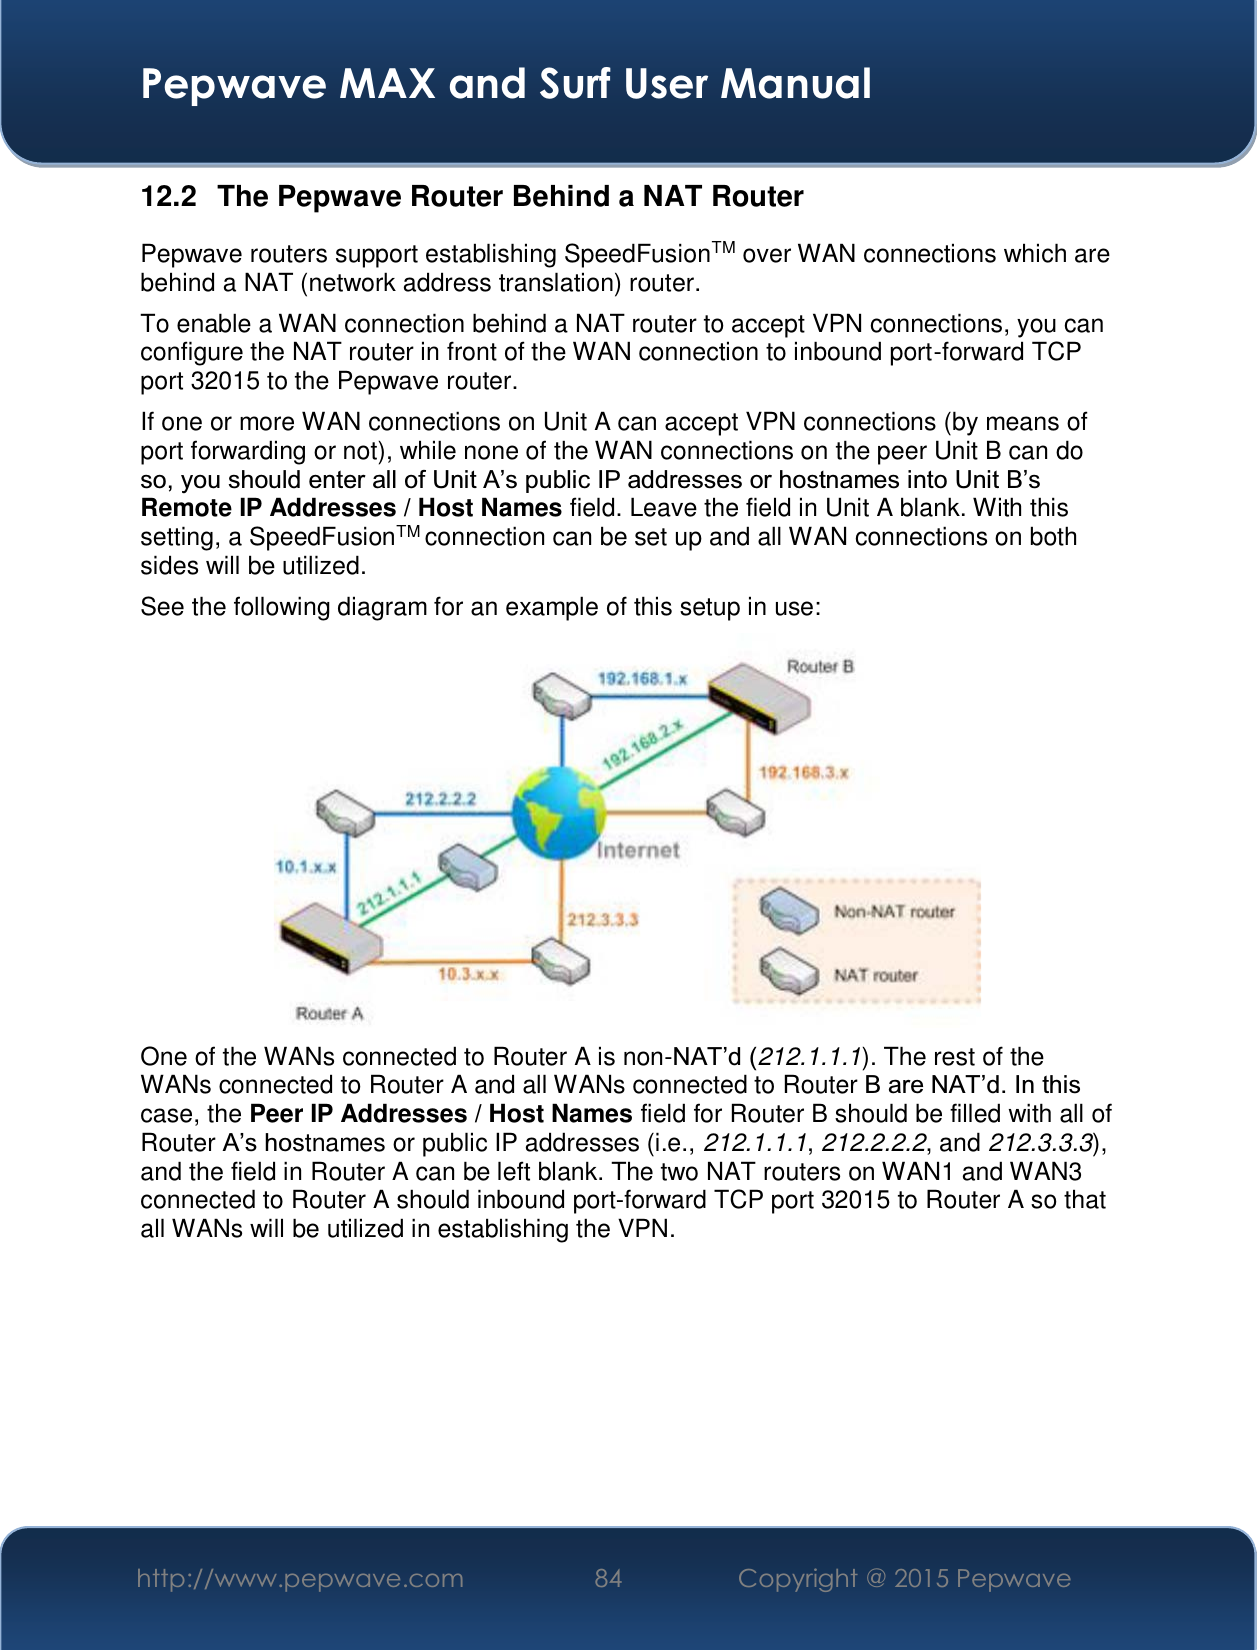  Pepwave MAX and Surf User Manual http://www.pepwave.com  84    Copyright @ 2015 Pepwave   12.2  The Pepwave Router Behind a NAT Router Pepwave routers support establishing SpeedFusionTM over WAN connections which are behind a NAT (network address translation) router. To enable a WAN connection behind a NAT router to accept VPN connections, you can configure the NAT router in front of the WAN connection to inbound port-forward TCP port 32015 to the Pepwave router. If one or more WAN connections on Unit A can accept VPN connections (by means of port forwarding or not), while none of the WAN connections on the peer Unit B can do VR\RXVKRXOGHQWHUDOORI8QLW$¶VSXEOLF,3DGGUHVVHVRUKRVWQDPHVLQWR8QLW%¶VRemote IP Addresses / Host Names field. Leave the field in Unit A blank. With this setting, a SpeedFusionTM connection can be set up and all WAN connections on both sides will be utilized. See the following diagram for an example of this setup in use:  One of the WANs connected to Router A is non-1$7¶G212.1.1.1). The rest of the WANs connected to Router A and all WANs connected to Router %DUH1$7¶G,QWKLVcase, the Peer IP Addresses / Host Names field for Router B should be filled with all of Router $¶VKRVtnames or public IP addresses (i.e., 212.1.1.1, 212.2.2.2, and 212.3.3.3), and the field in Router A can be left blank. The two NAT routers on WAN1 and WAN3 connected to Router A should inbound port-forward TCP port 32015 to Router A so that all WANs will be utilized in establishing the VPN.       